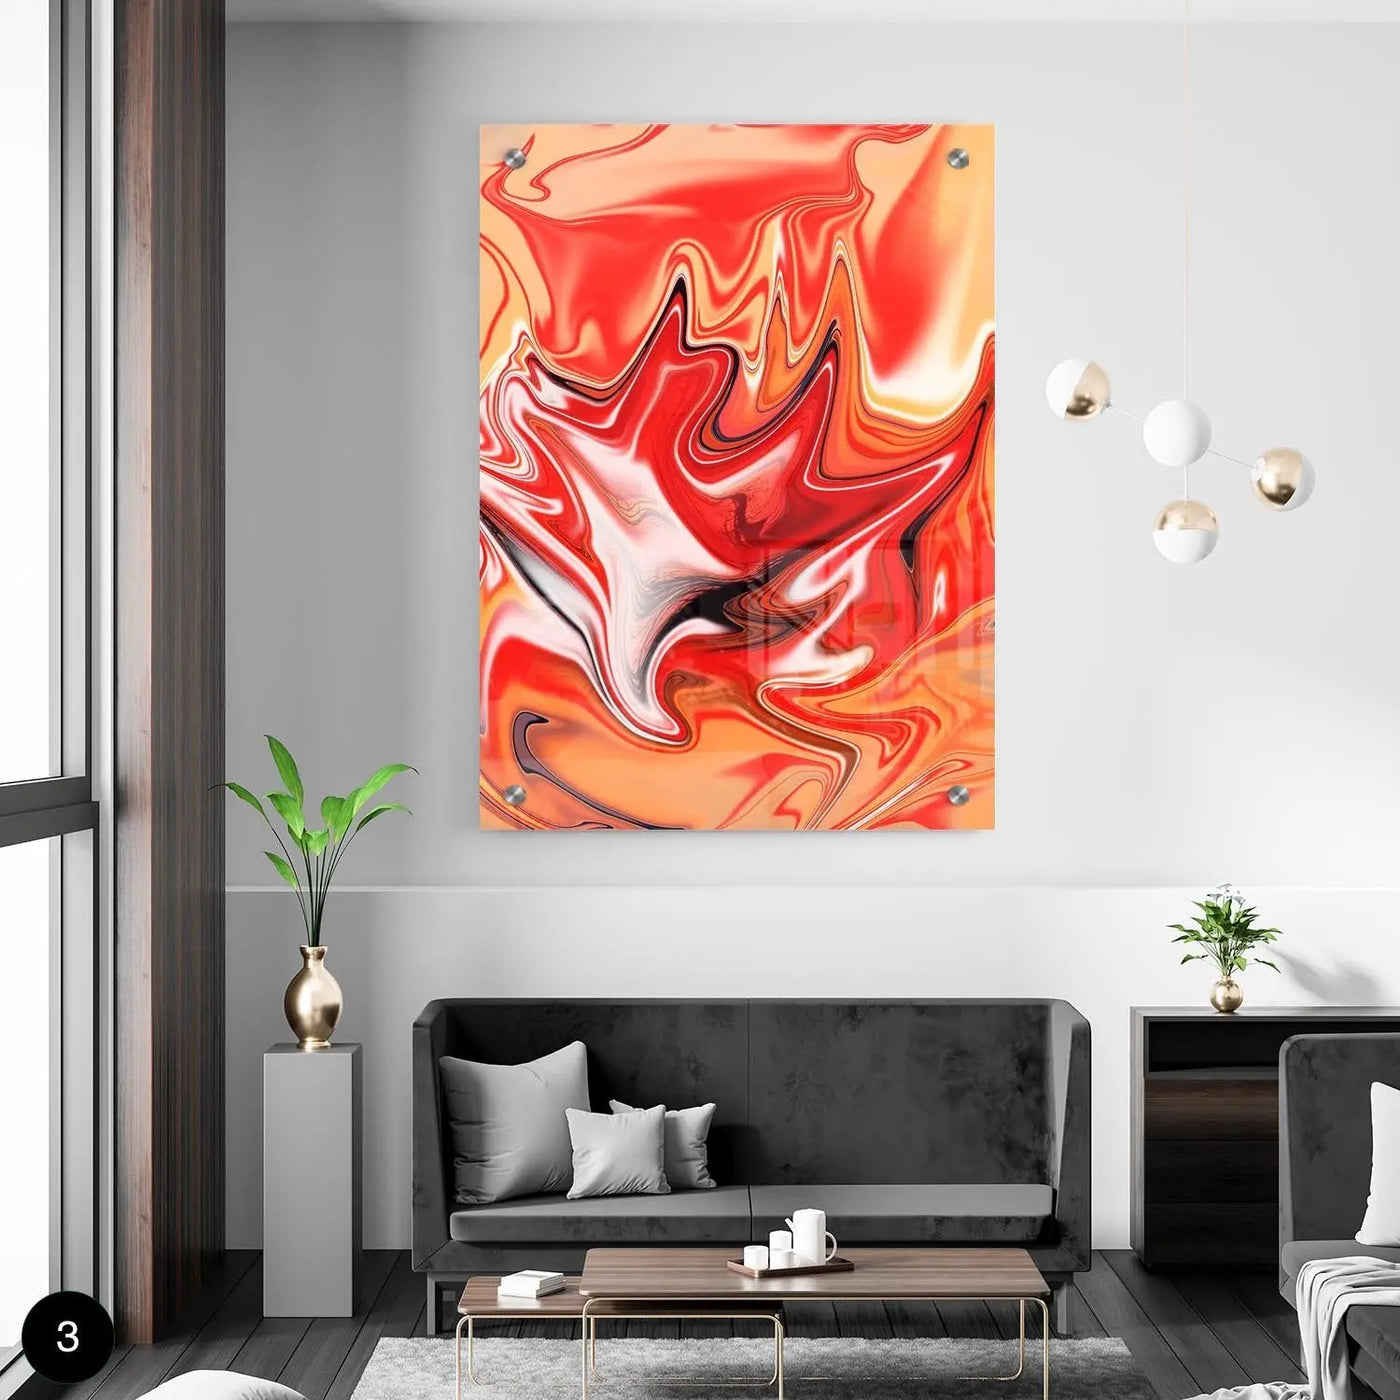 "ABSTRACT PUNCH" - Art For Everyone